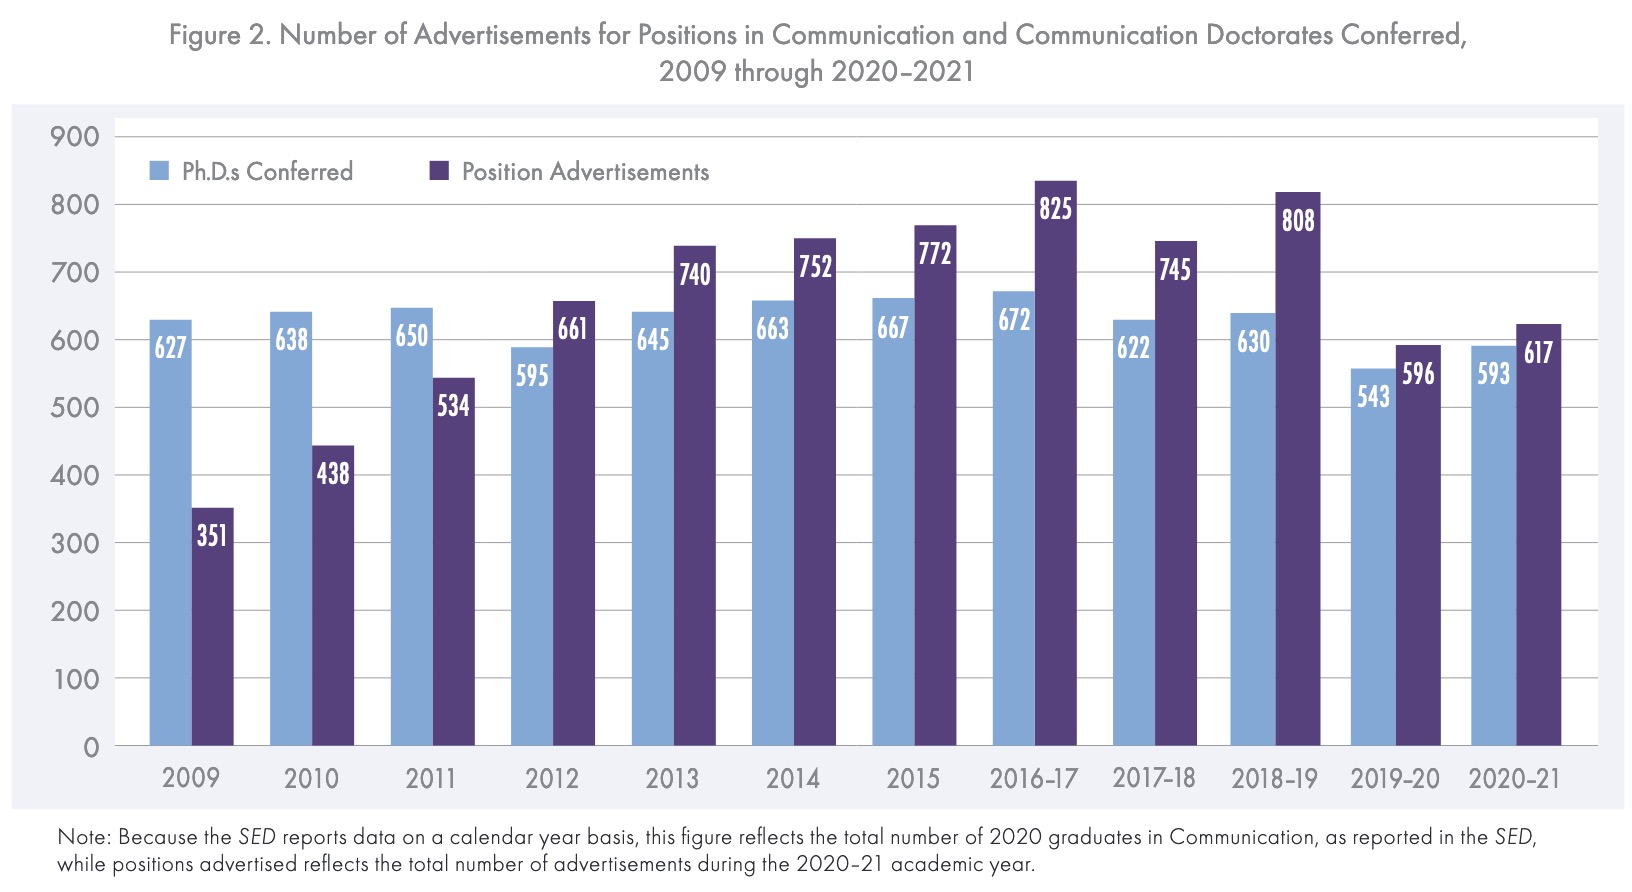 Bar chart showing trends in number of job ads and PhDs granted in communication since 2009